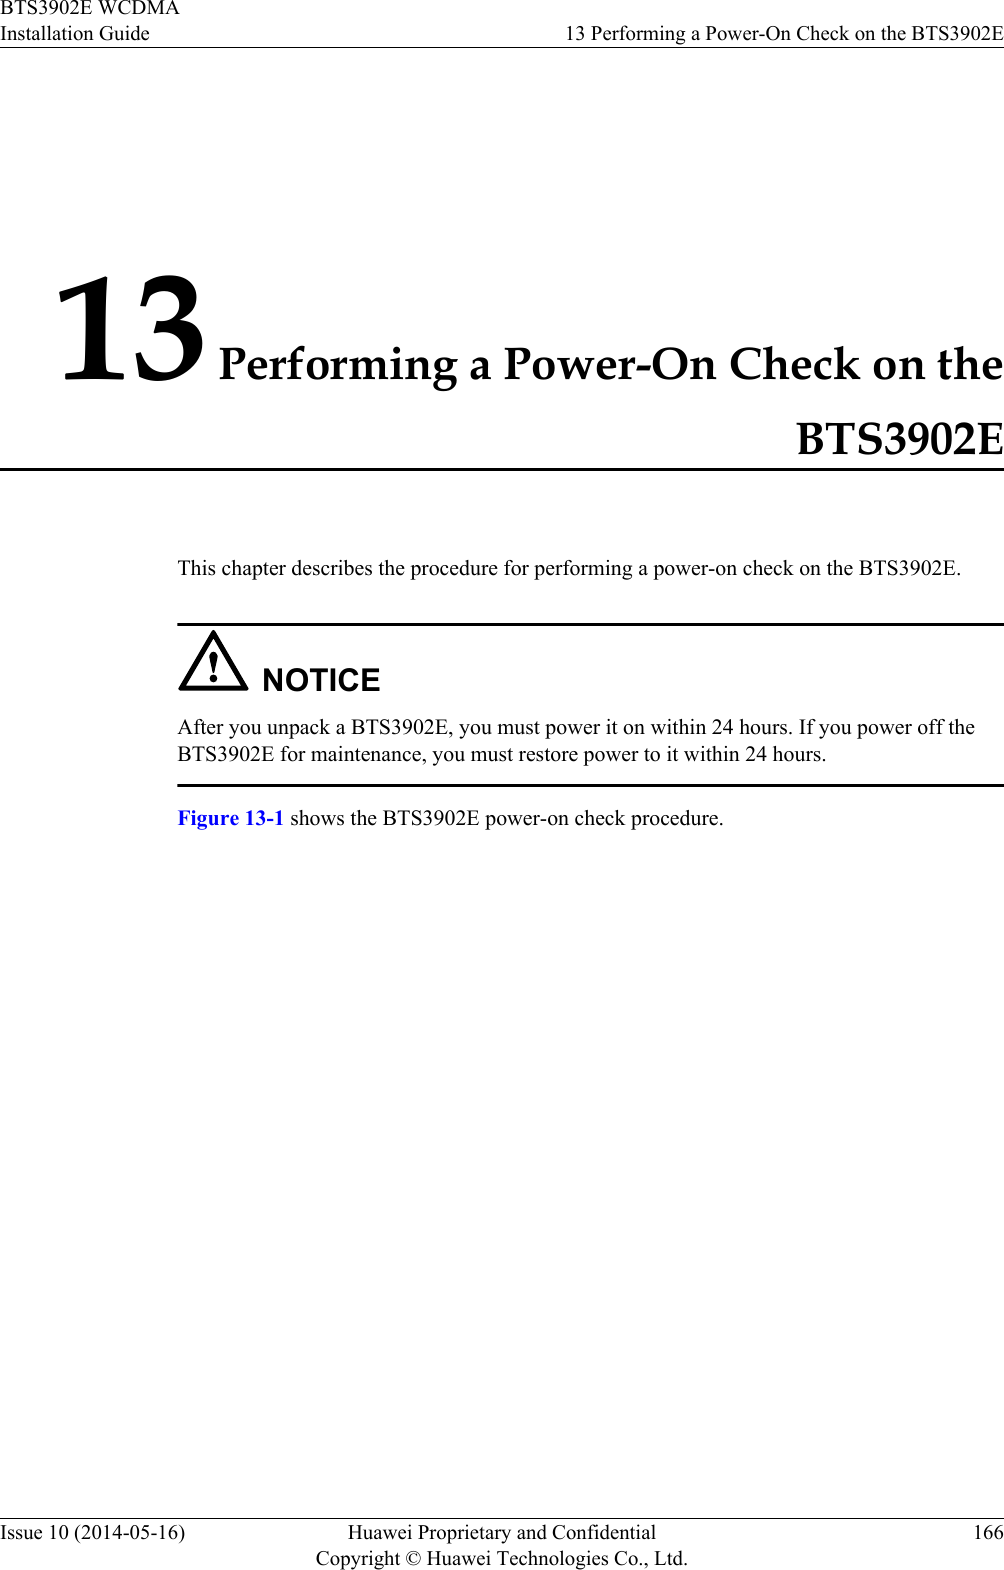 13 Performing a Power-On Check on theBTS3902EThis chapter describes the procedure for performing a power-on check on the BTS3902E.NOTICEAfter you unpack a BTS3902E, you must power it on within 24 hours. If you power off theBTS3902E for maintenance, you must restore power to it within 24 hours.Figure 13-1 shows the BTS3902E power-on check procedure.BTS3902E WCDMAInstallation Guide 13 Performing a Power-On Check on the BTS3902EIssue 10 (2014-05-16) Huawei Proprietary and ConfidentialCopyright © Huawei Technologies Co., Ltd.166